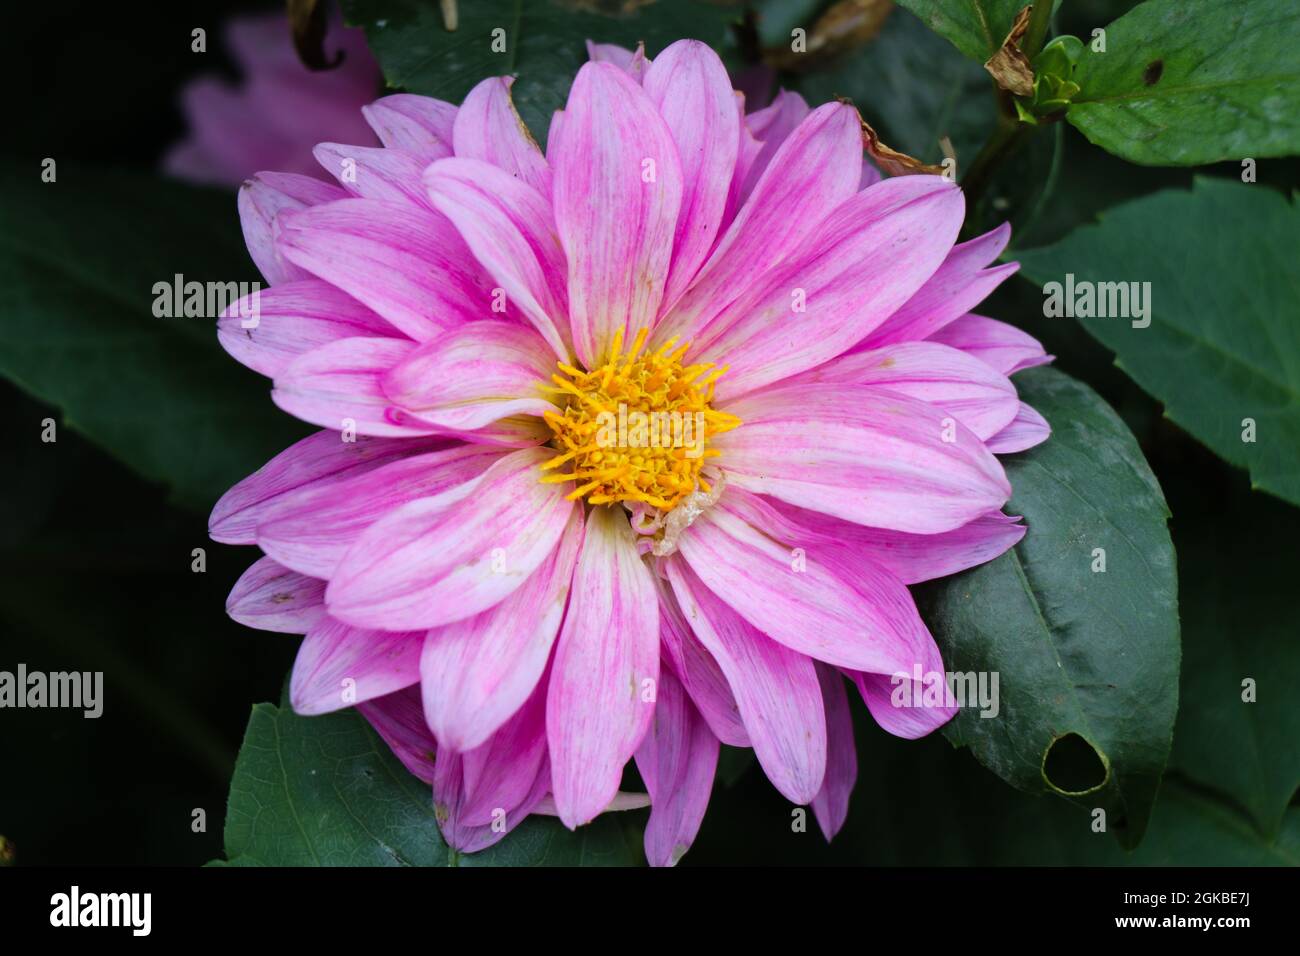 Light pink dahlia flower with yellow anther closeup, dahlia flower for wallpaper and background Stock Photo